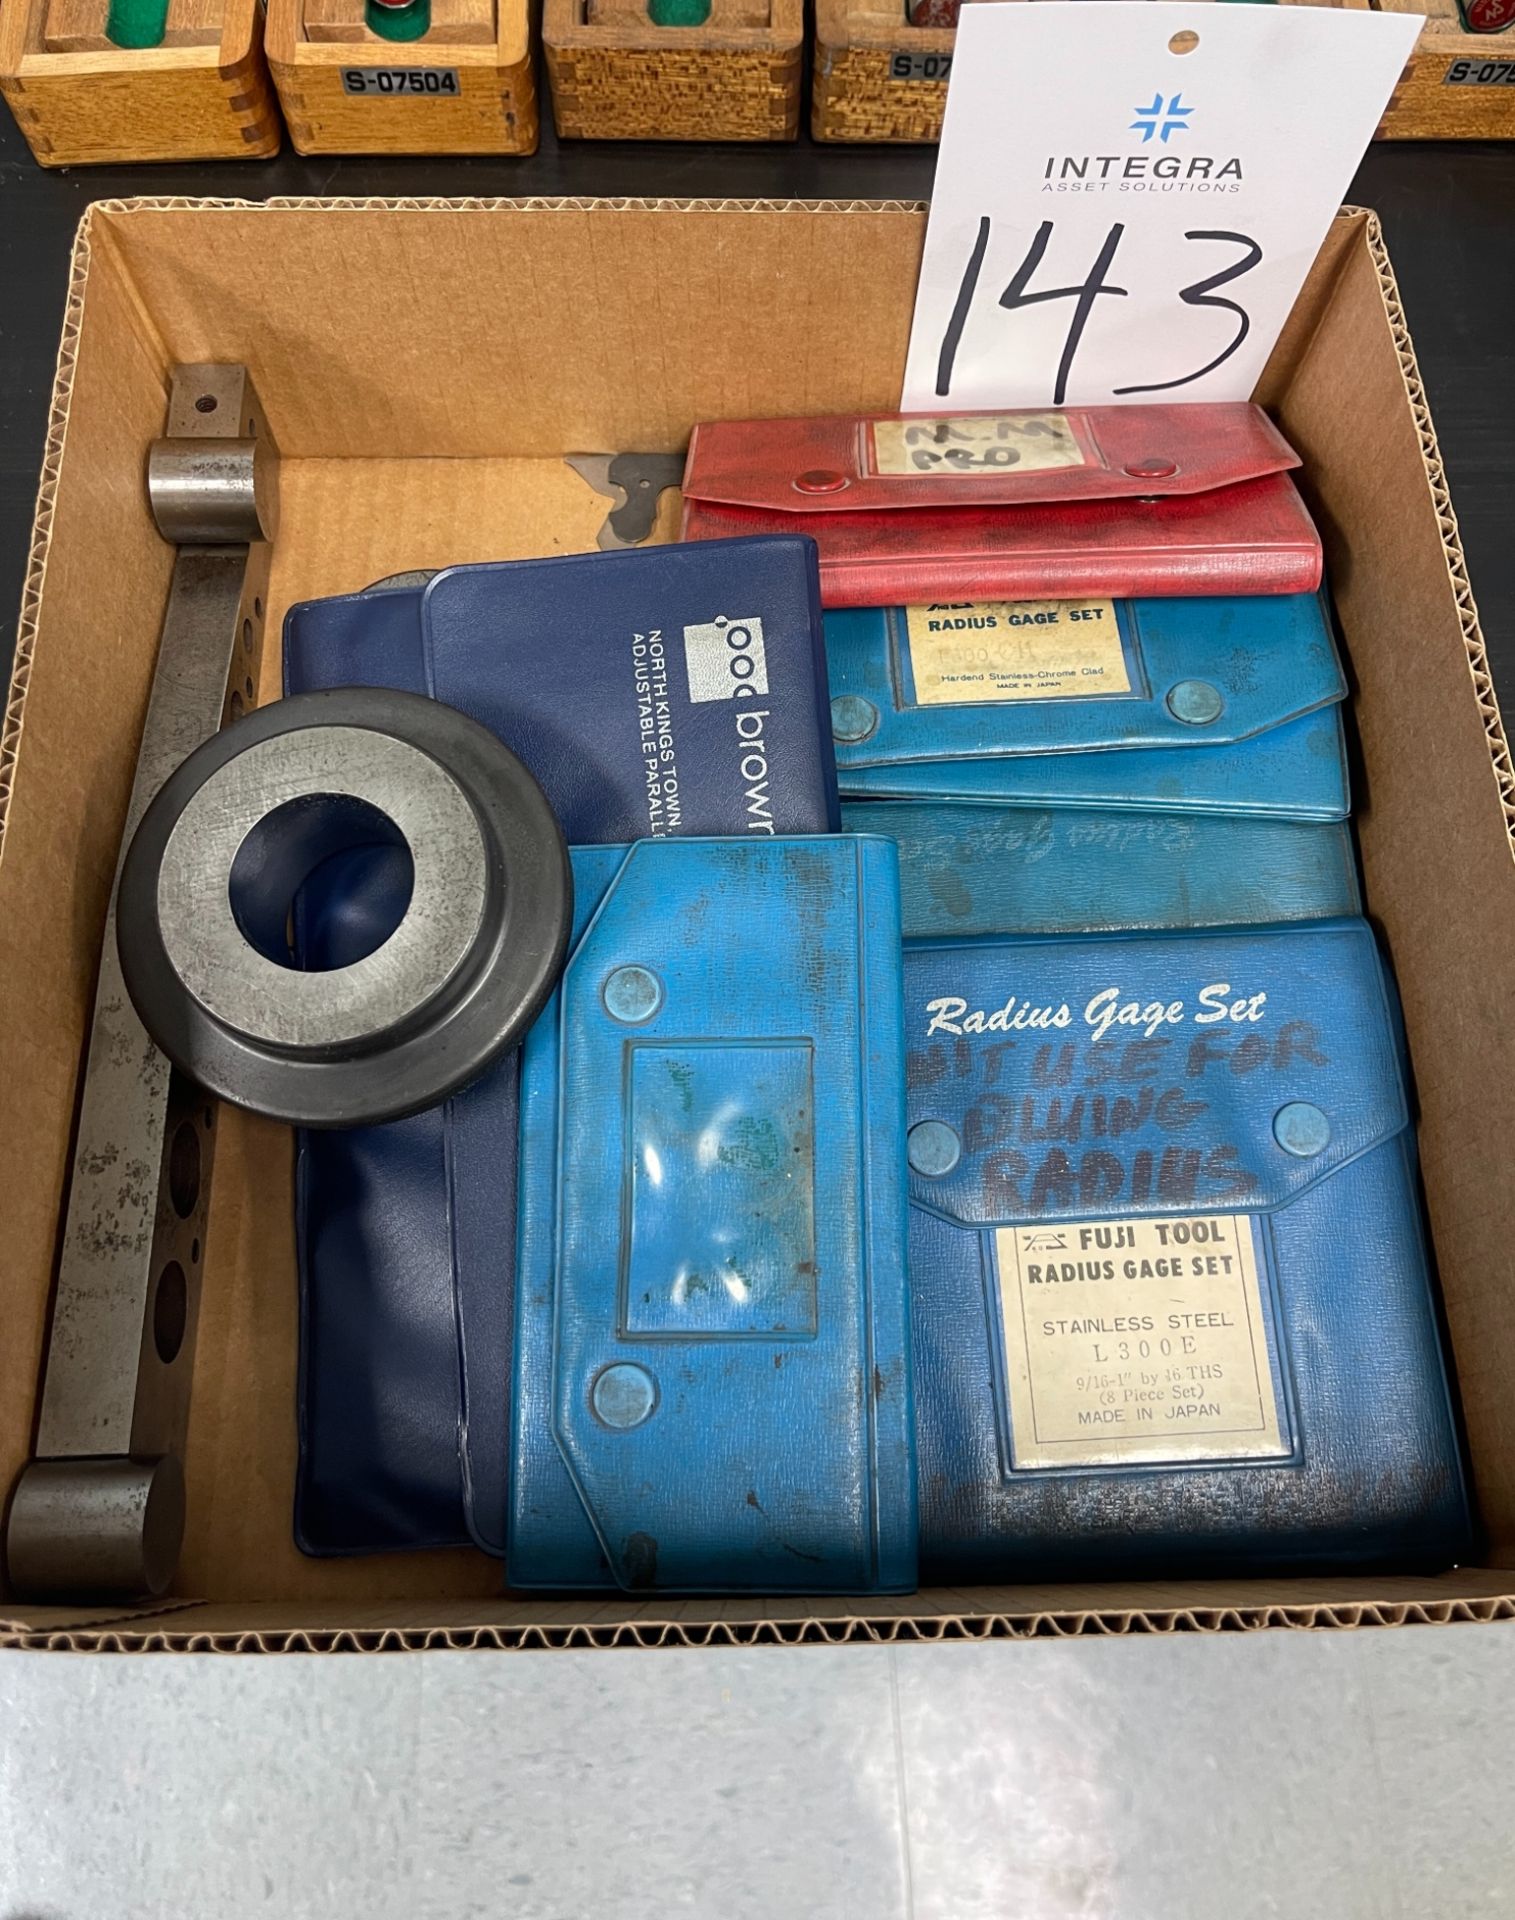 Lot of Assorted Radius Gage and Adjustable Parallel Sets